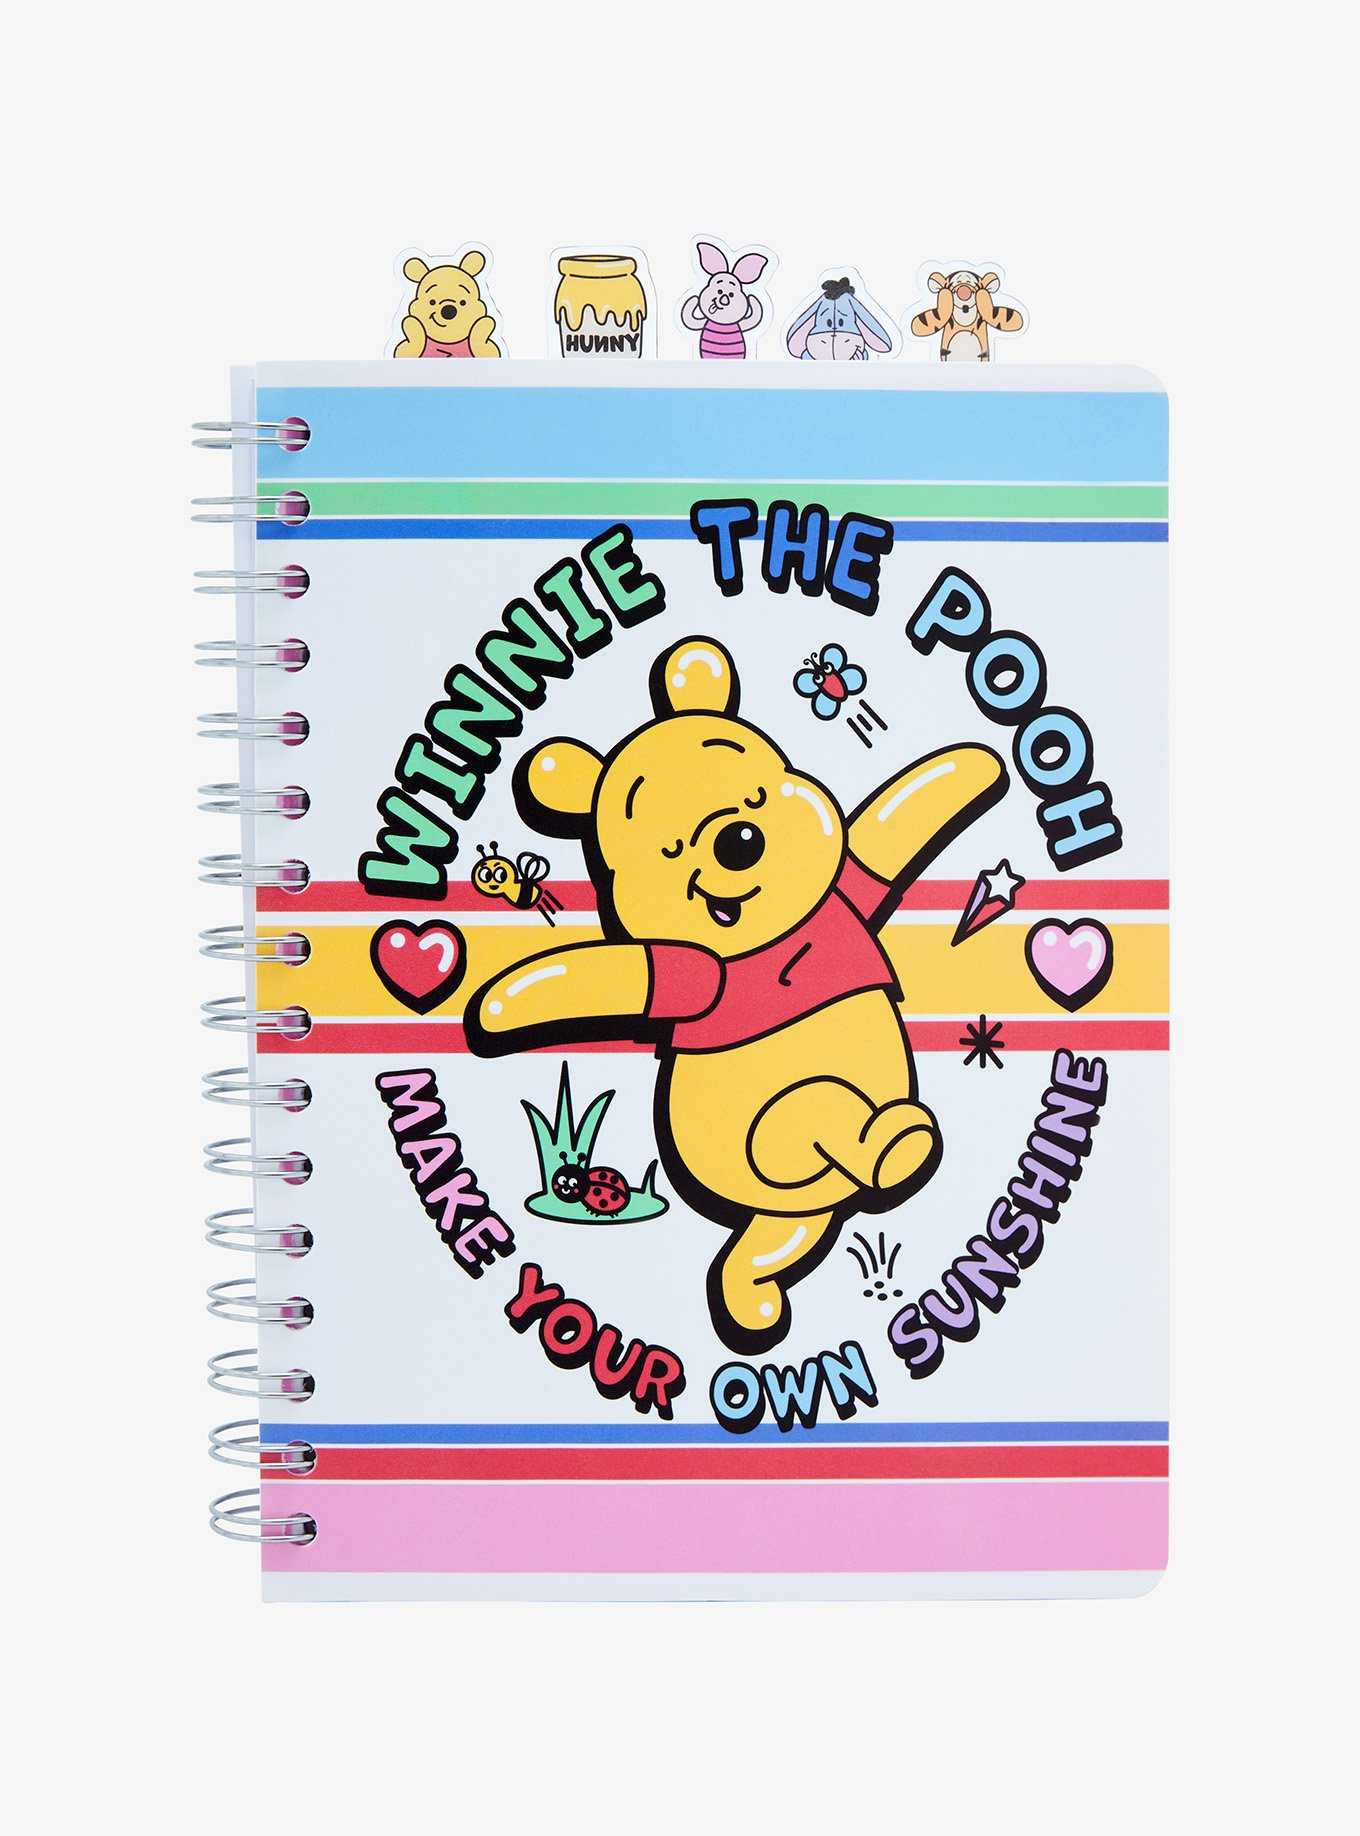 Disney Winnie the Pooh Sunshine Figural Tab Journal - BoxLunch Exclusive, , hi-res